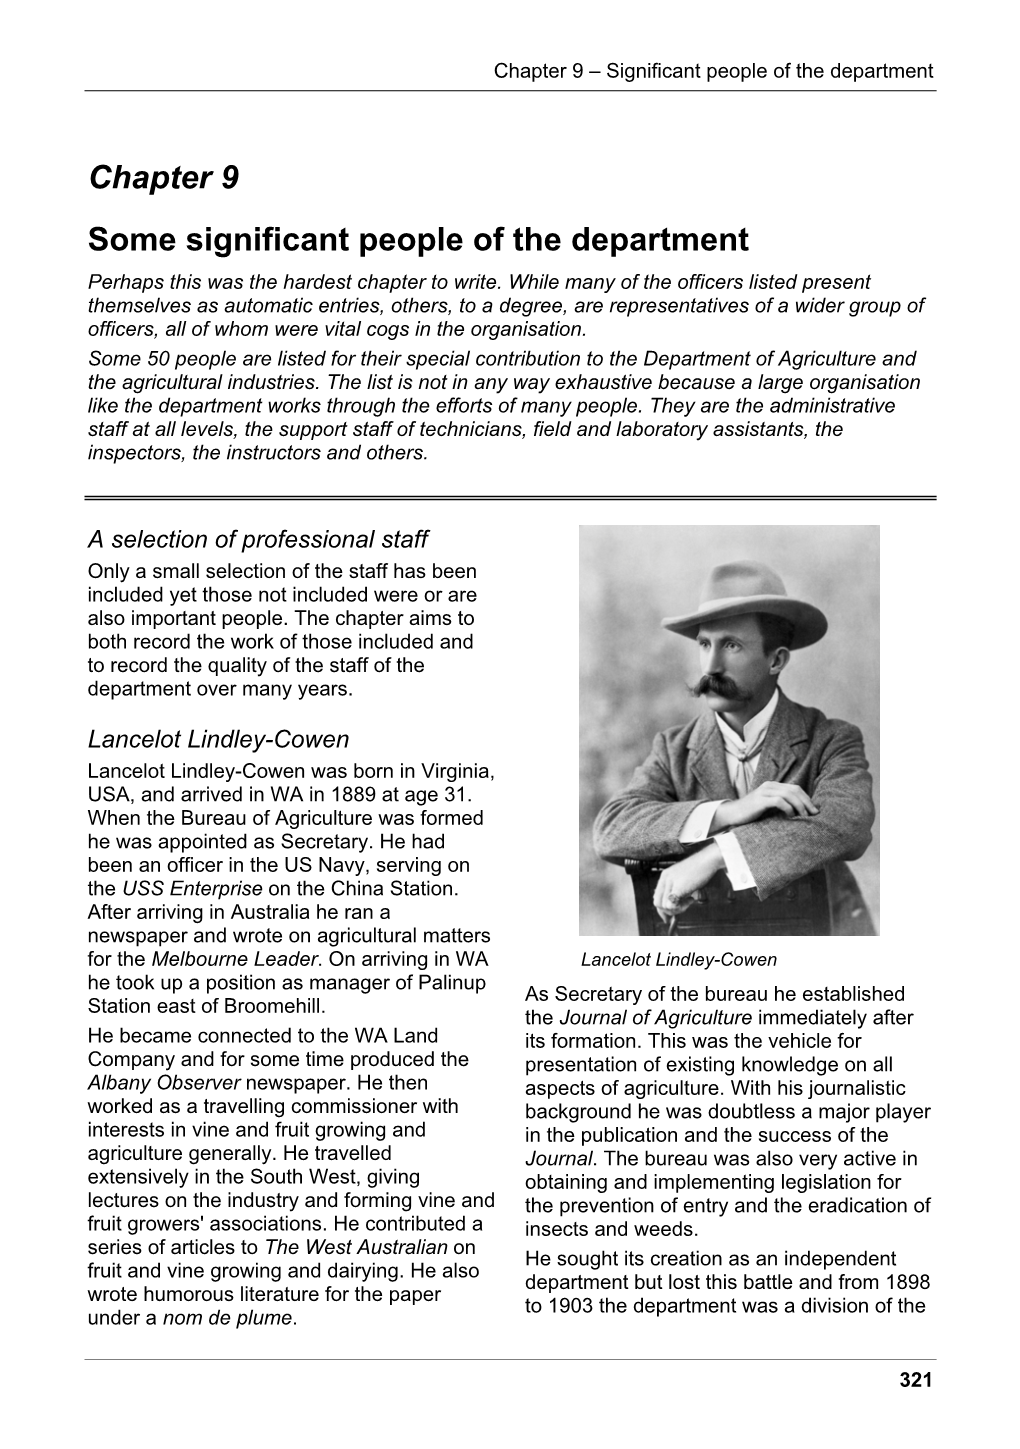 Chapter 9 Some Significant People of the Department Perhaps This Was the Hardest Chapter to Write